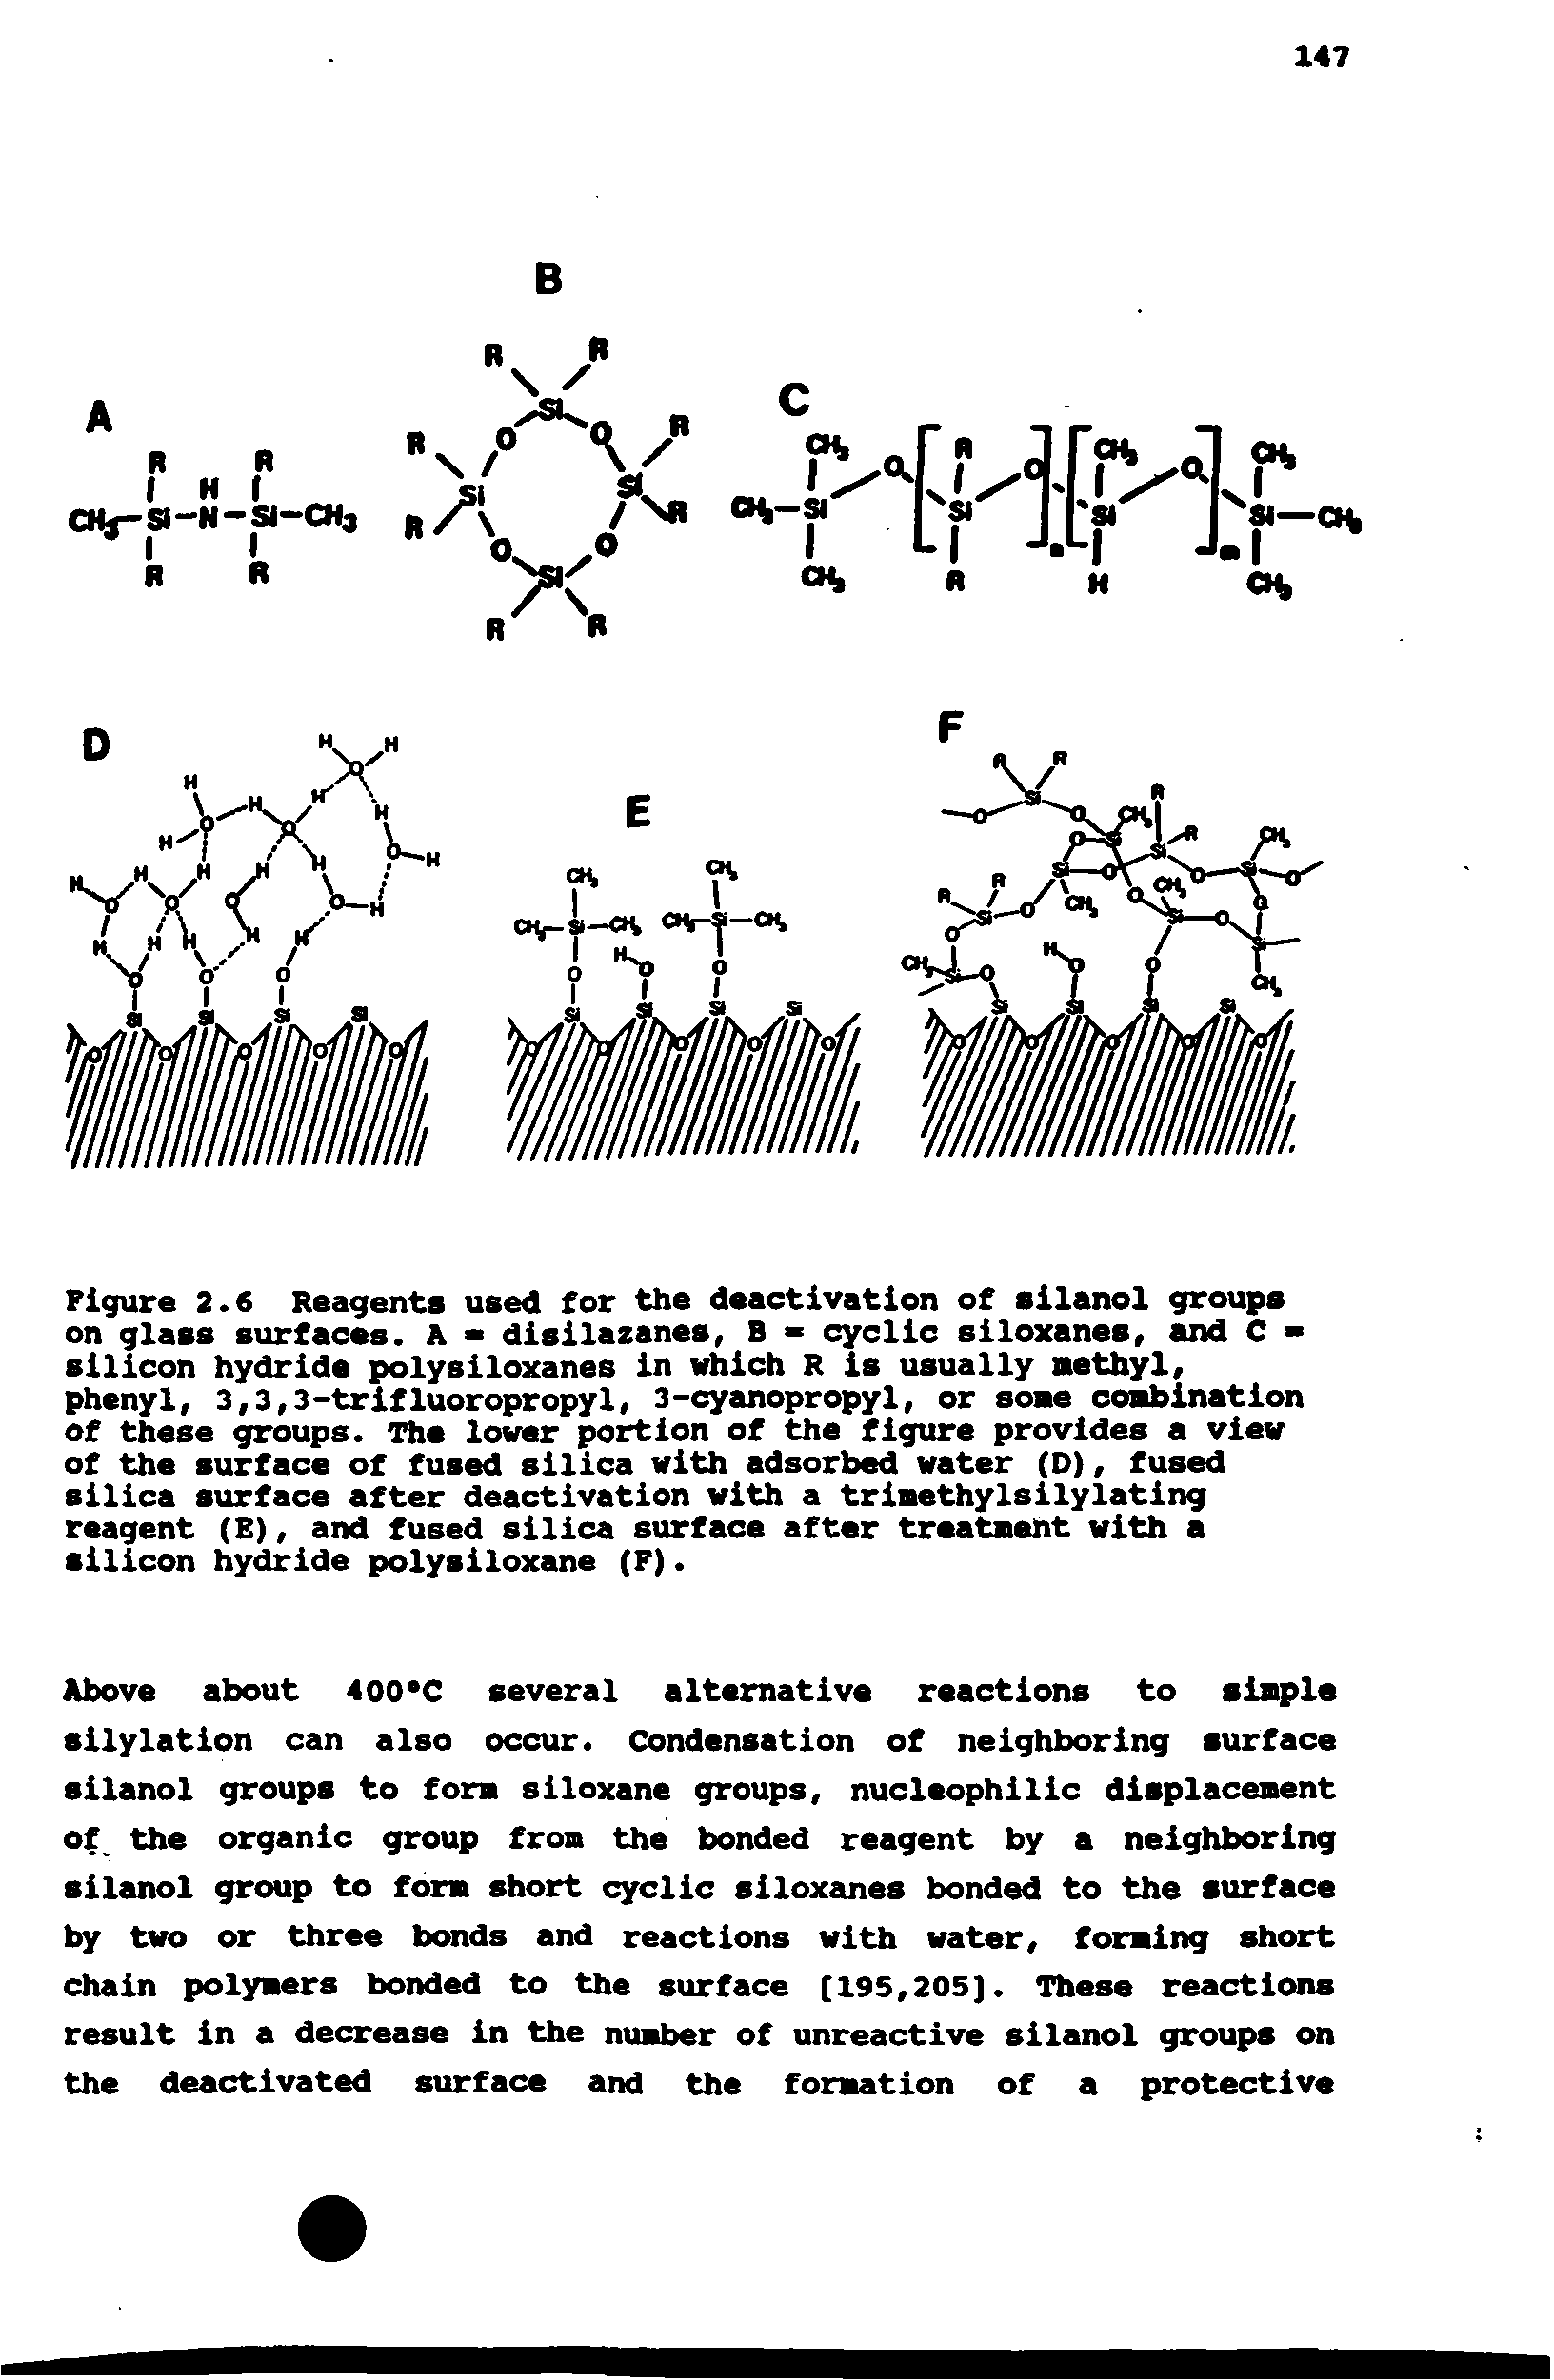 Figure 2.6 Reagents used for the deactivation of silanol groups on glass surfaces. A - disilazanes, B > cyclic siloxanes, and C -silicon hydride polysiloxanes in which R is usually methyl, phenyl, 3,3,3-trifluoropropyl, 3-cyanopropyl, or some combination of these groups. The lover portion of the figure provides a view of the surface of fused silica with adsorbed water (D), fused silica surface after deactivation with a trimethylsilylating reagent (E), and fused silica surface after treatment with a silicon hydride polysiloxane (F).